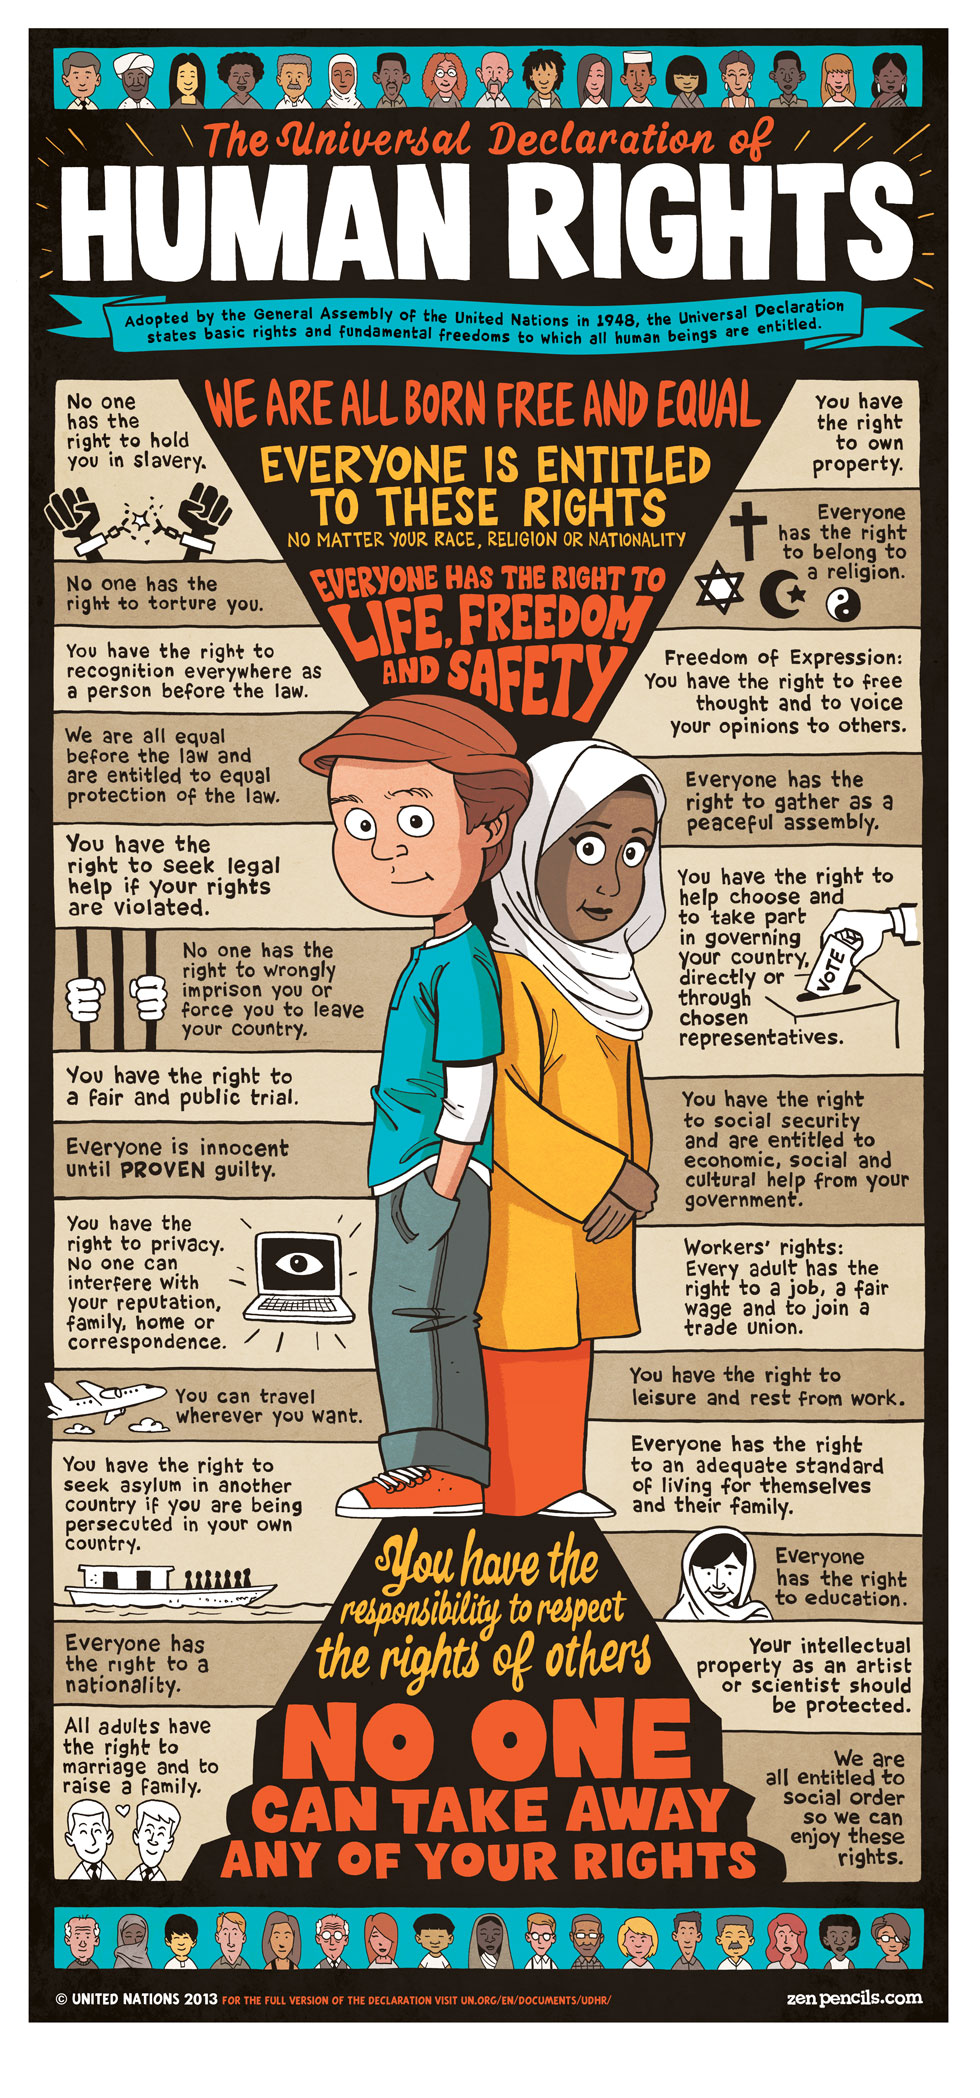 An overview of the declaration of human rights by the united nations